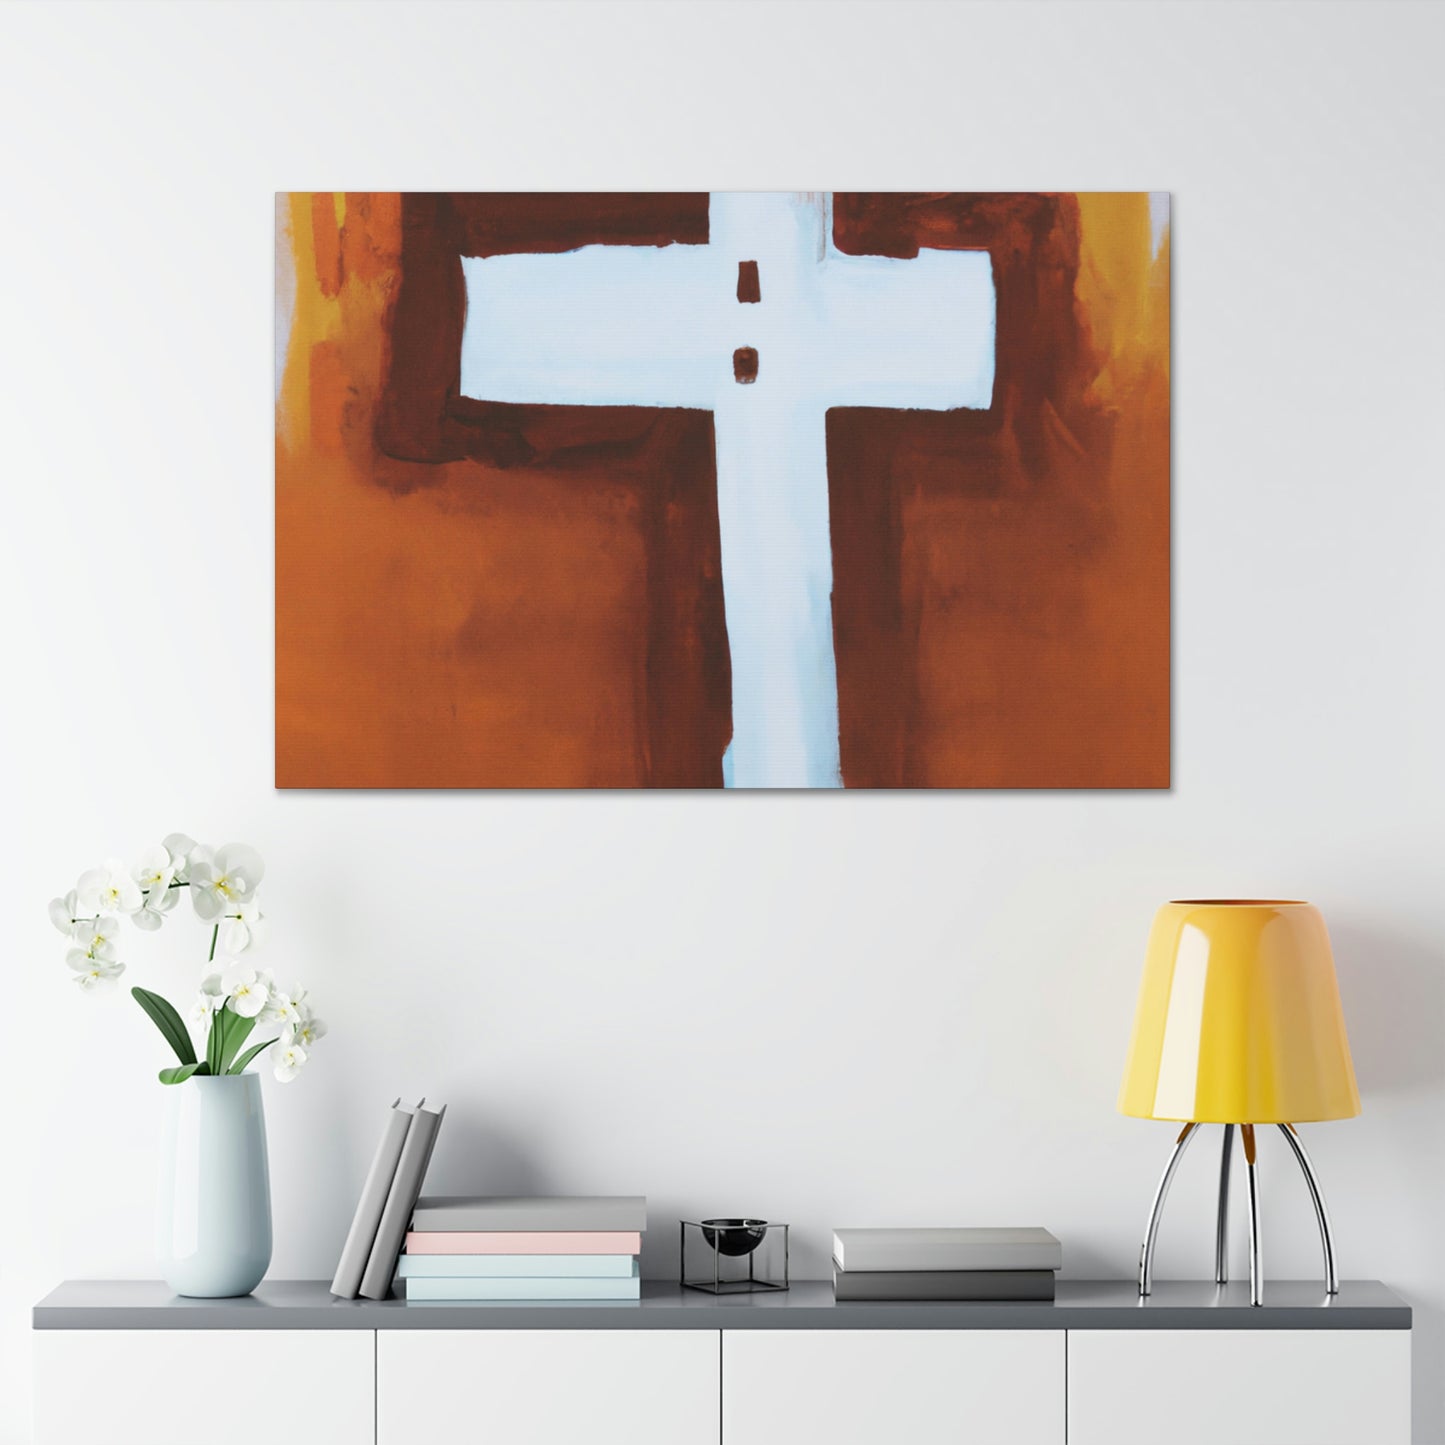 Psalm 119:105
"Your word is a lamp to my feet and a light to my path." - Canvas Wall Art